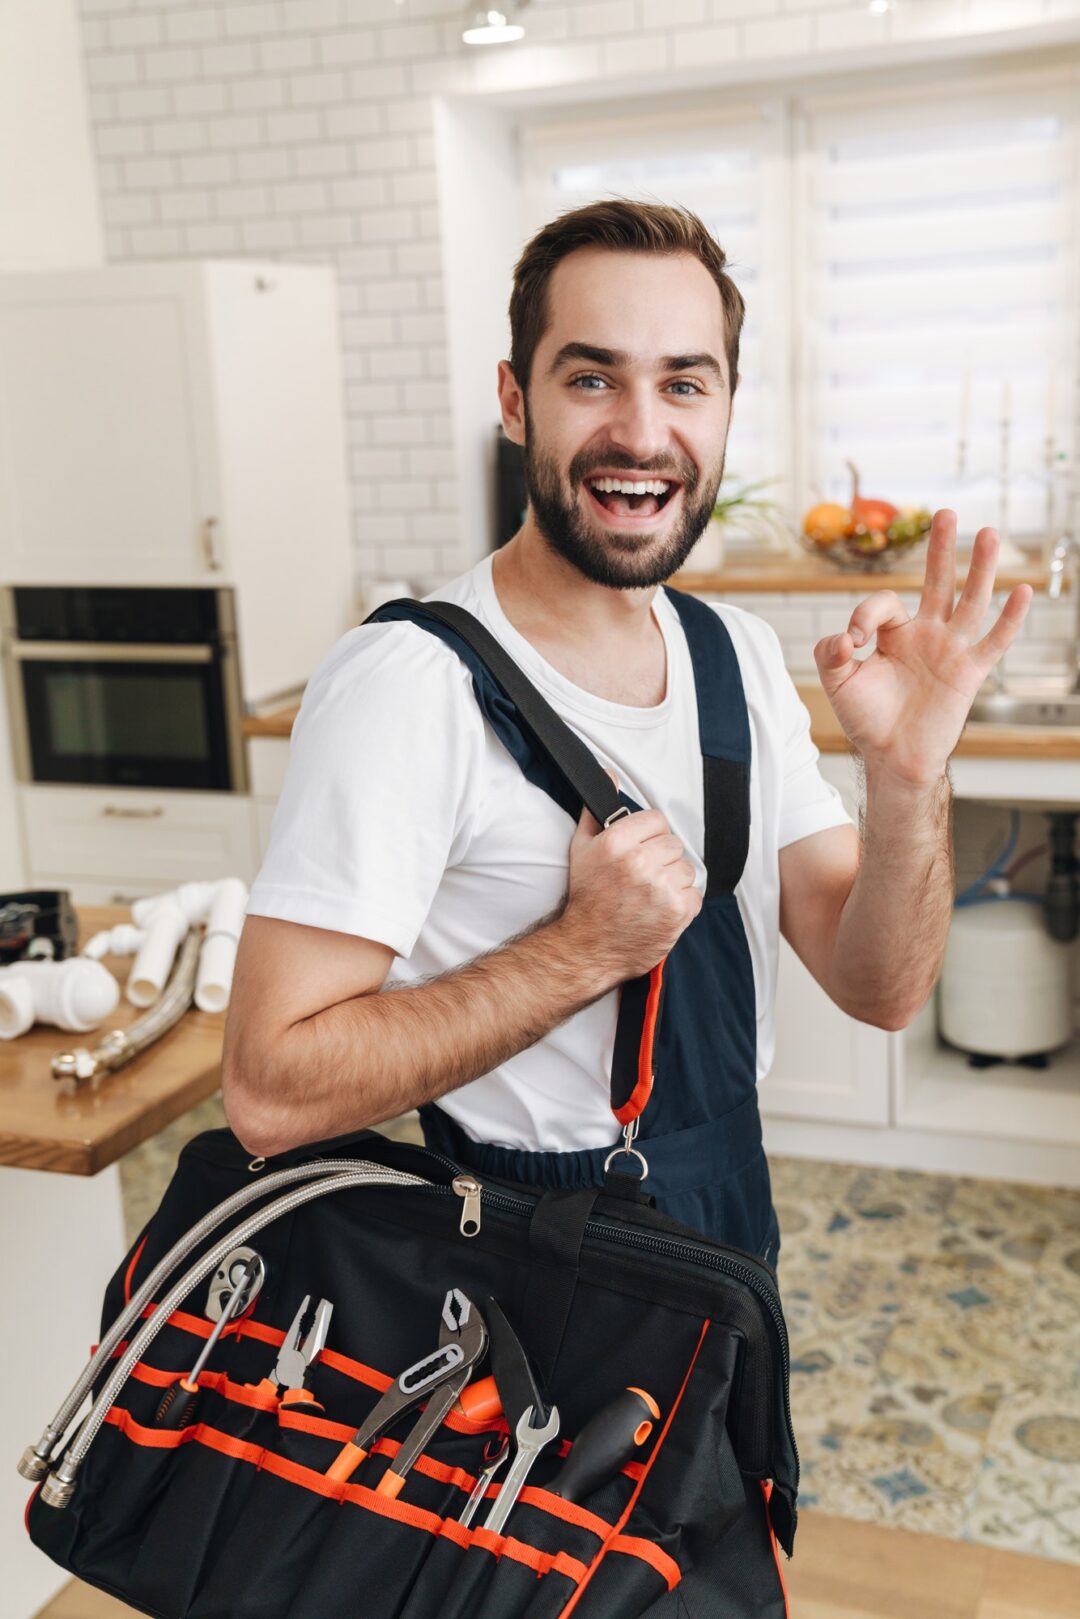 Image of plumber man with equipment gesturing okay sign in apartment